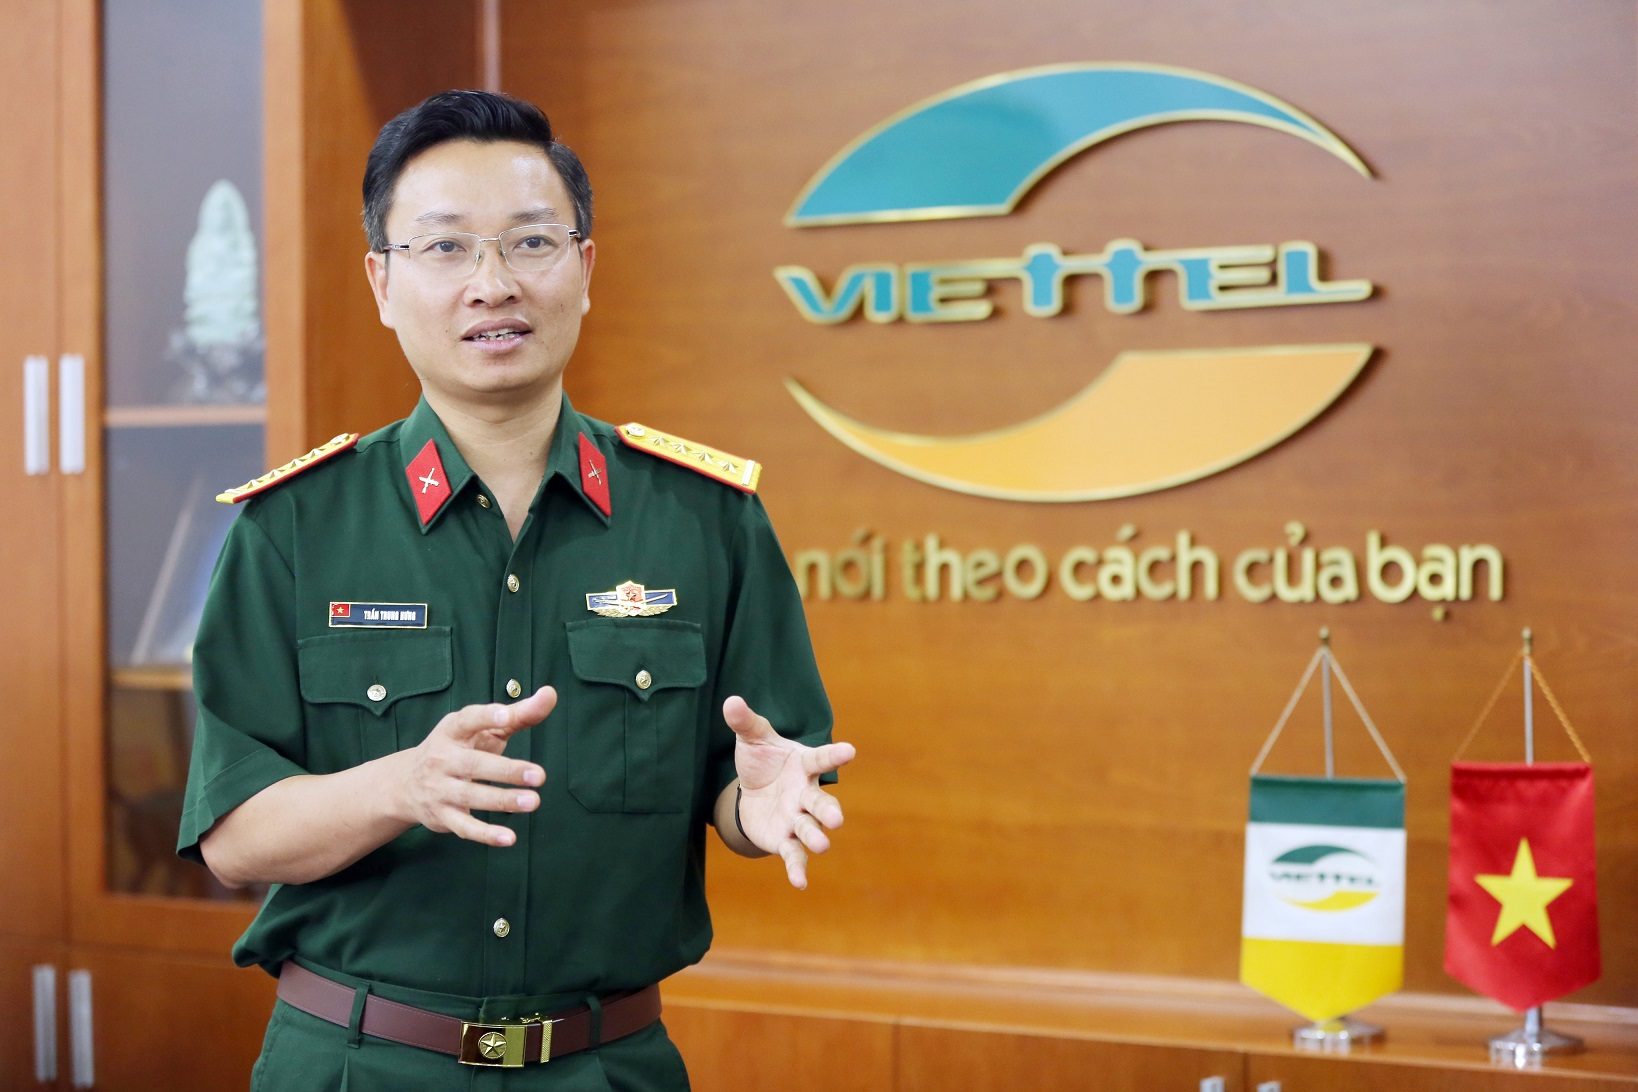 Vietnam's Viettel Post launches ride-hailing services, eyes regional expansion this year